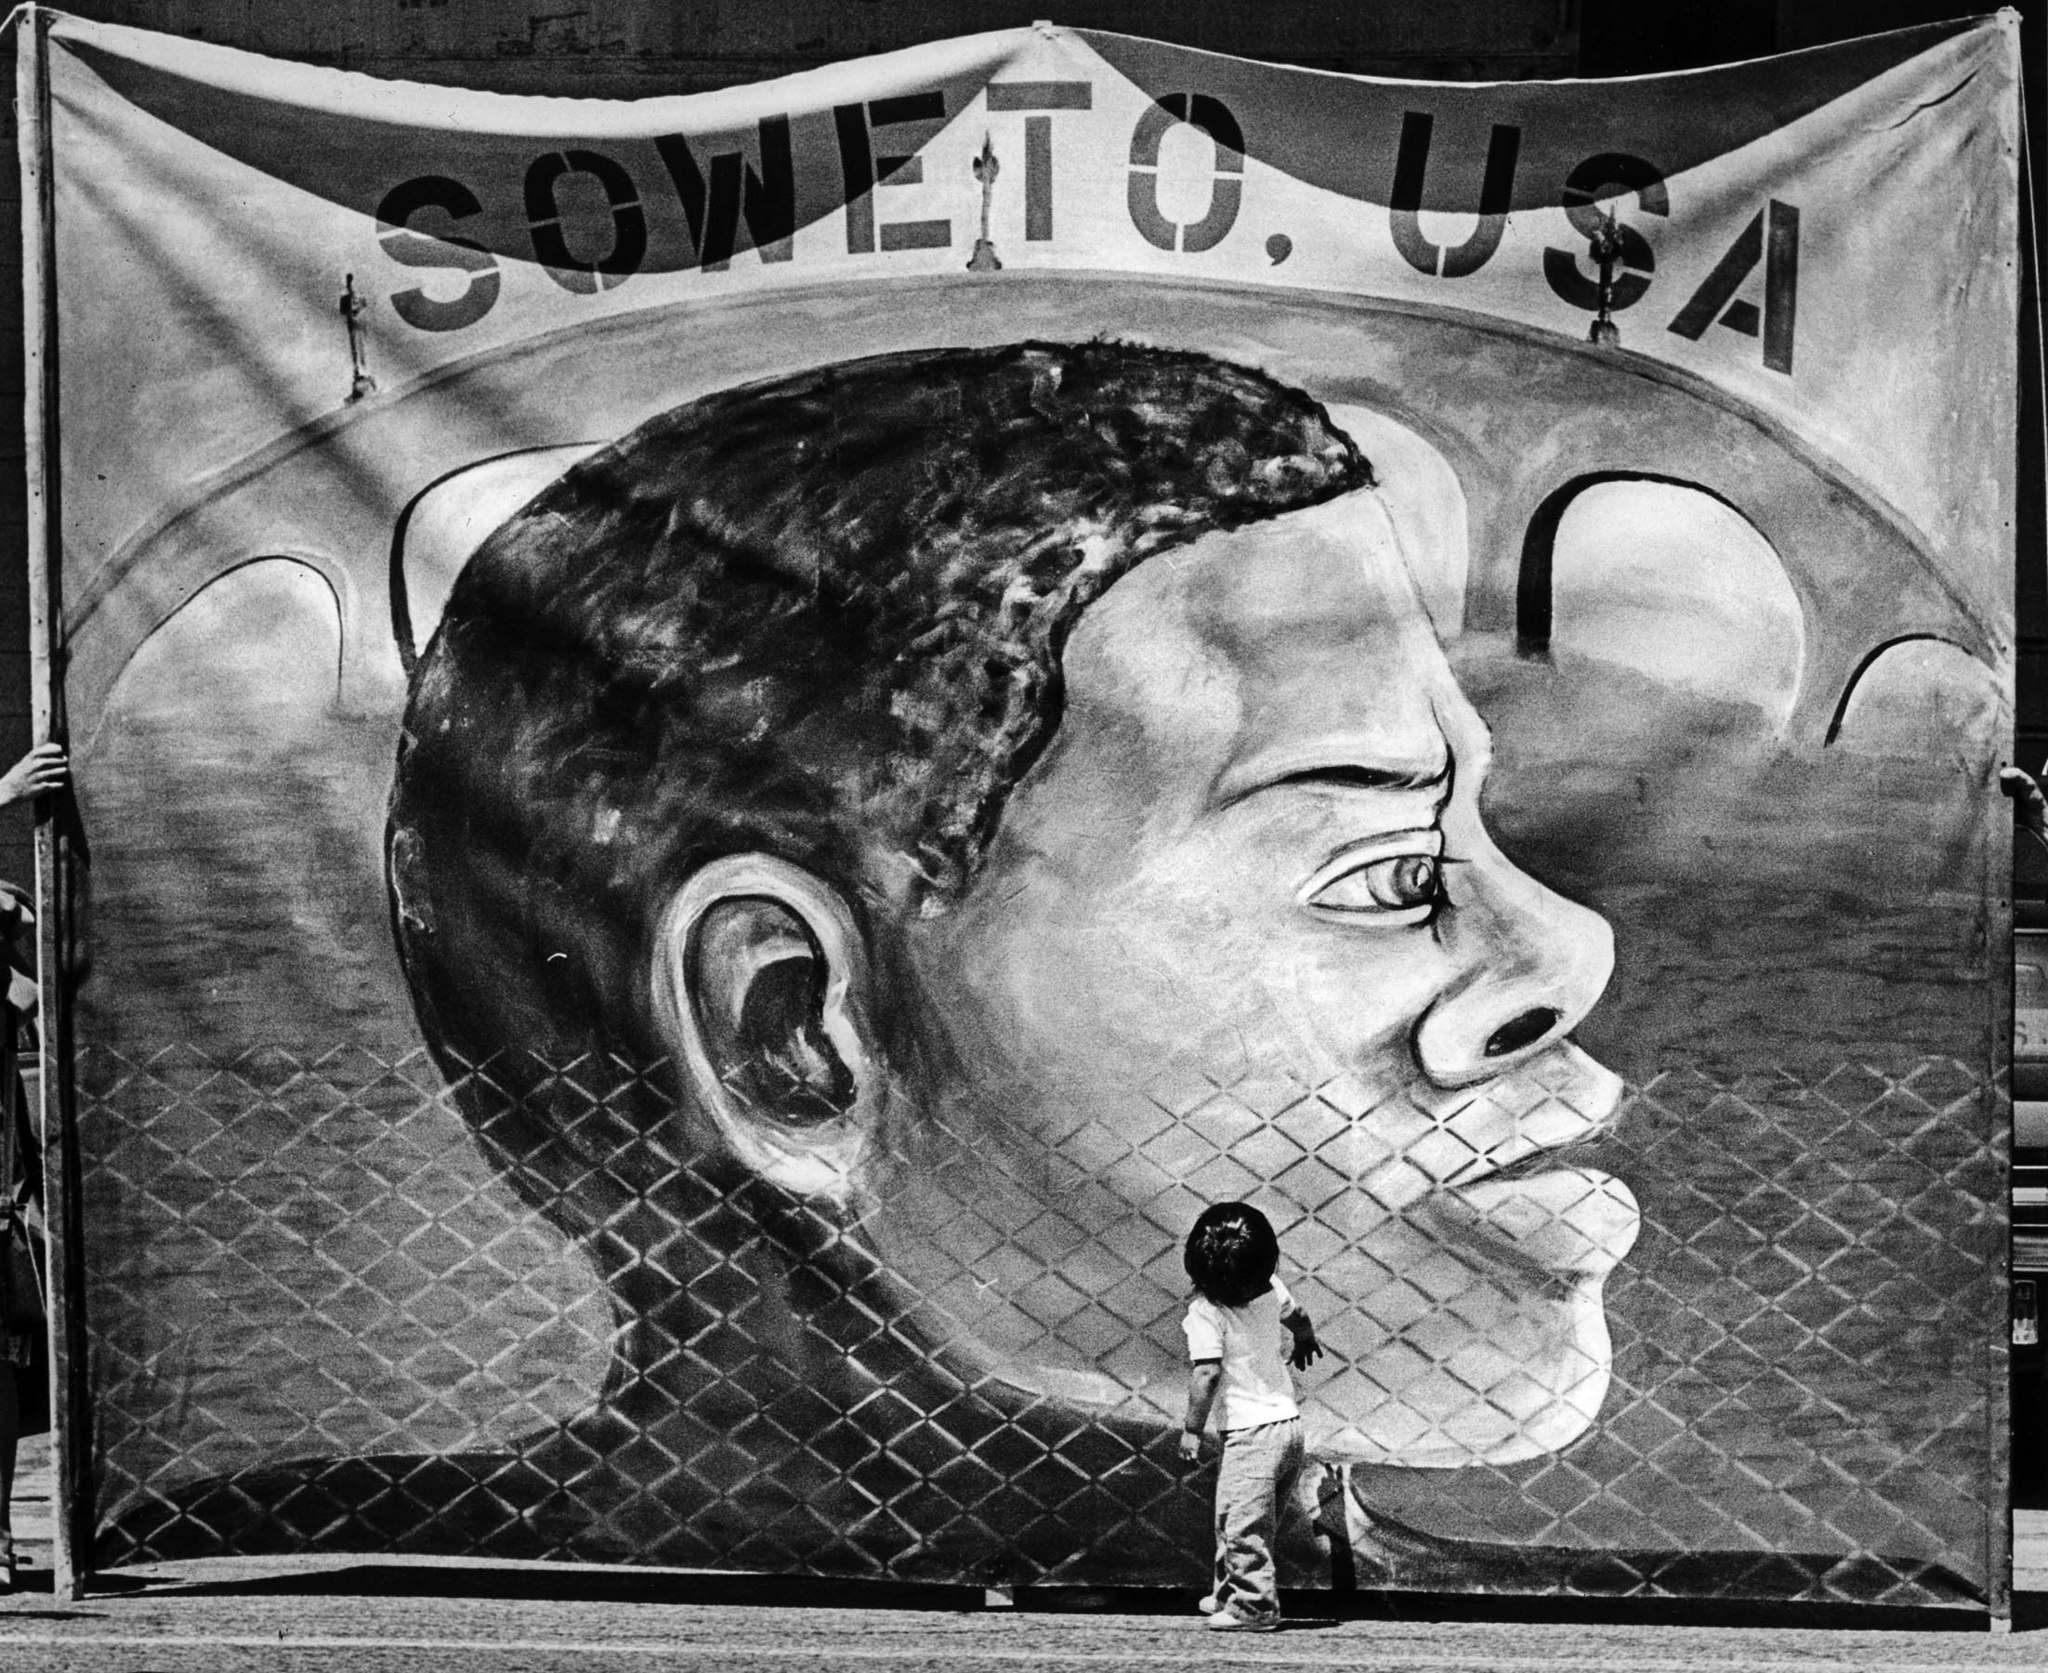 June 15, 1987: Child gazes at banner displayed by protestors outside of the Urban Campground. Protes